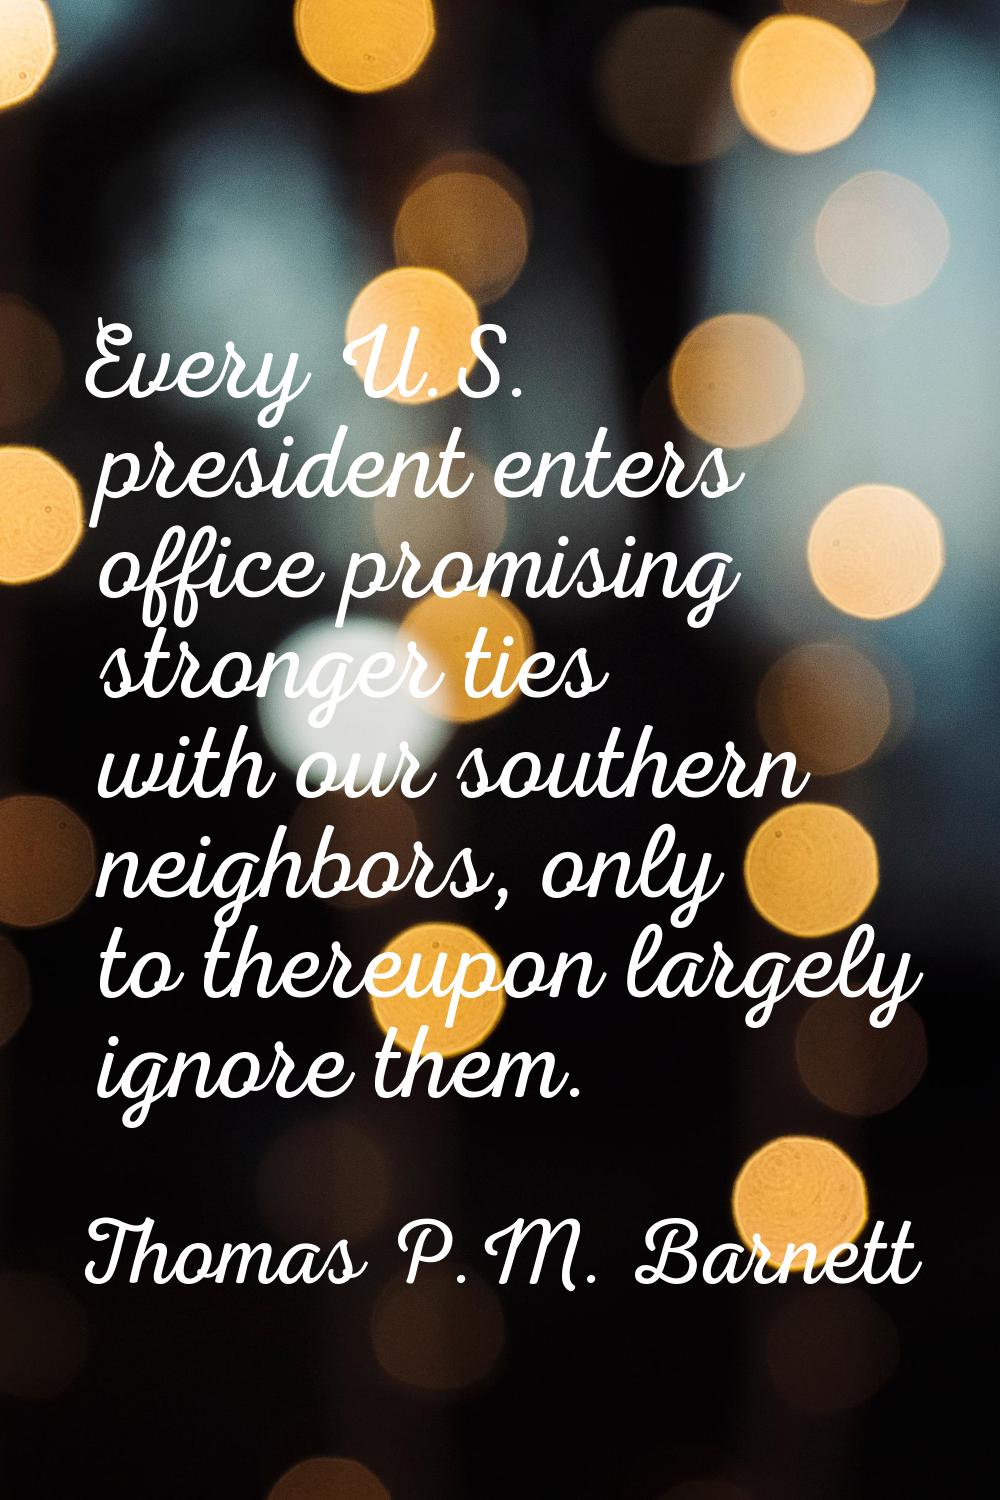 Every U.S. president enters office promising stronger ties with our southern neighbors, only to the